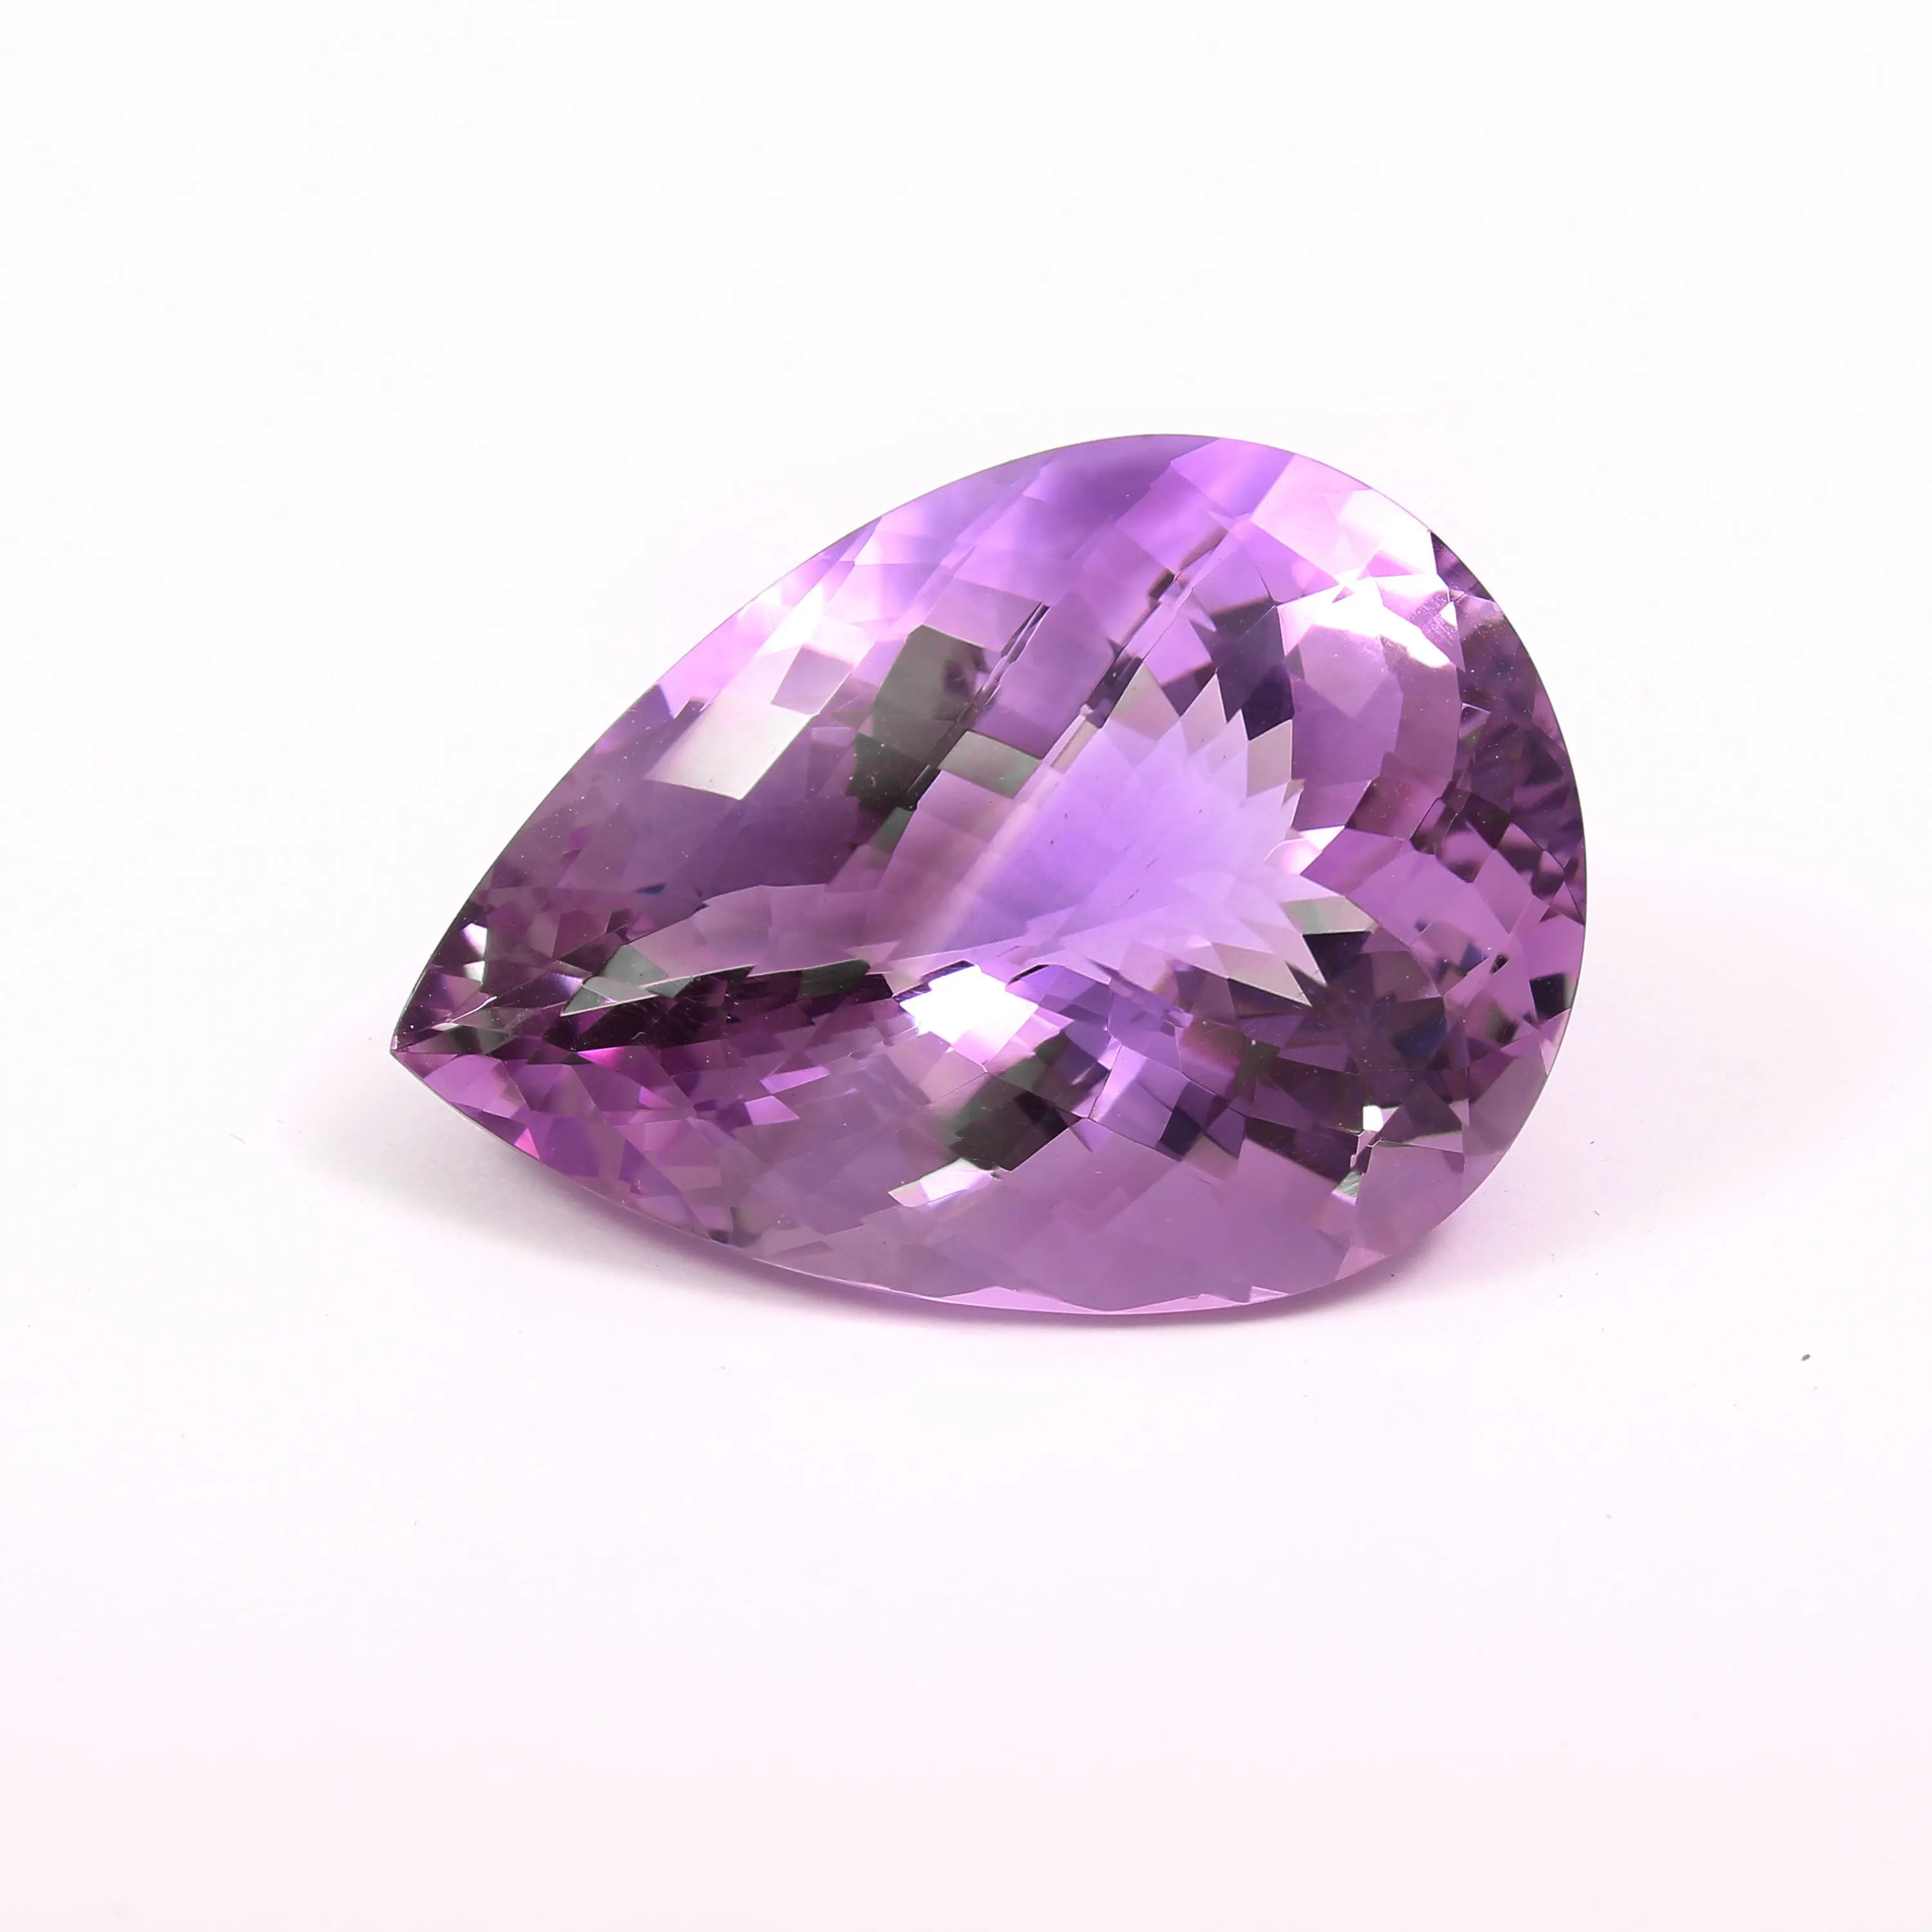 Excellent Big Size Pear Shape with Best Table Chaker Cut Finest Quality Natural Amethyst Loose Gemstone Made in India